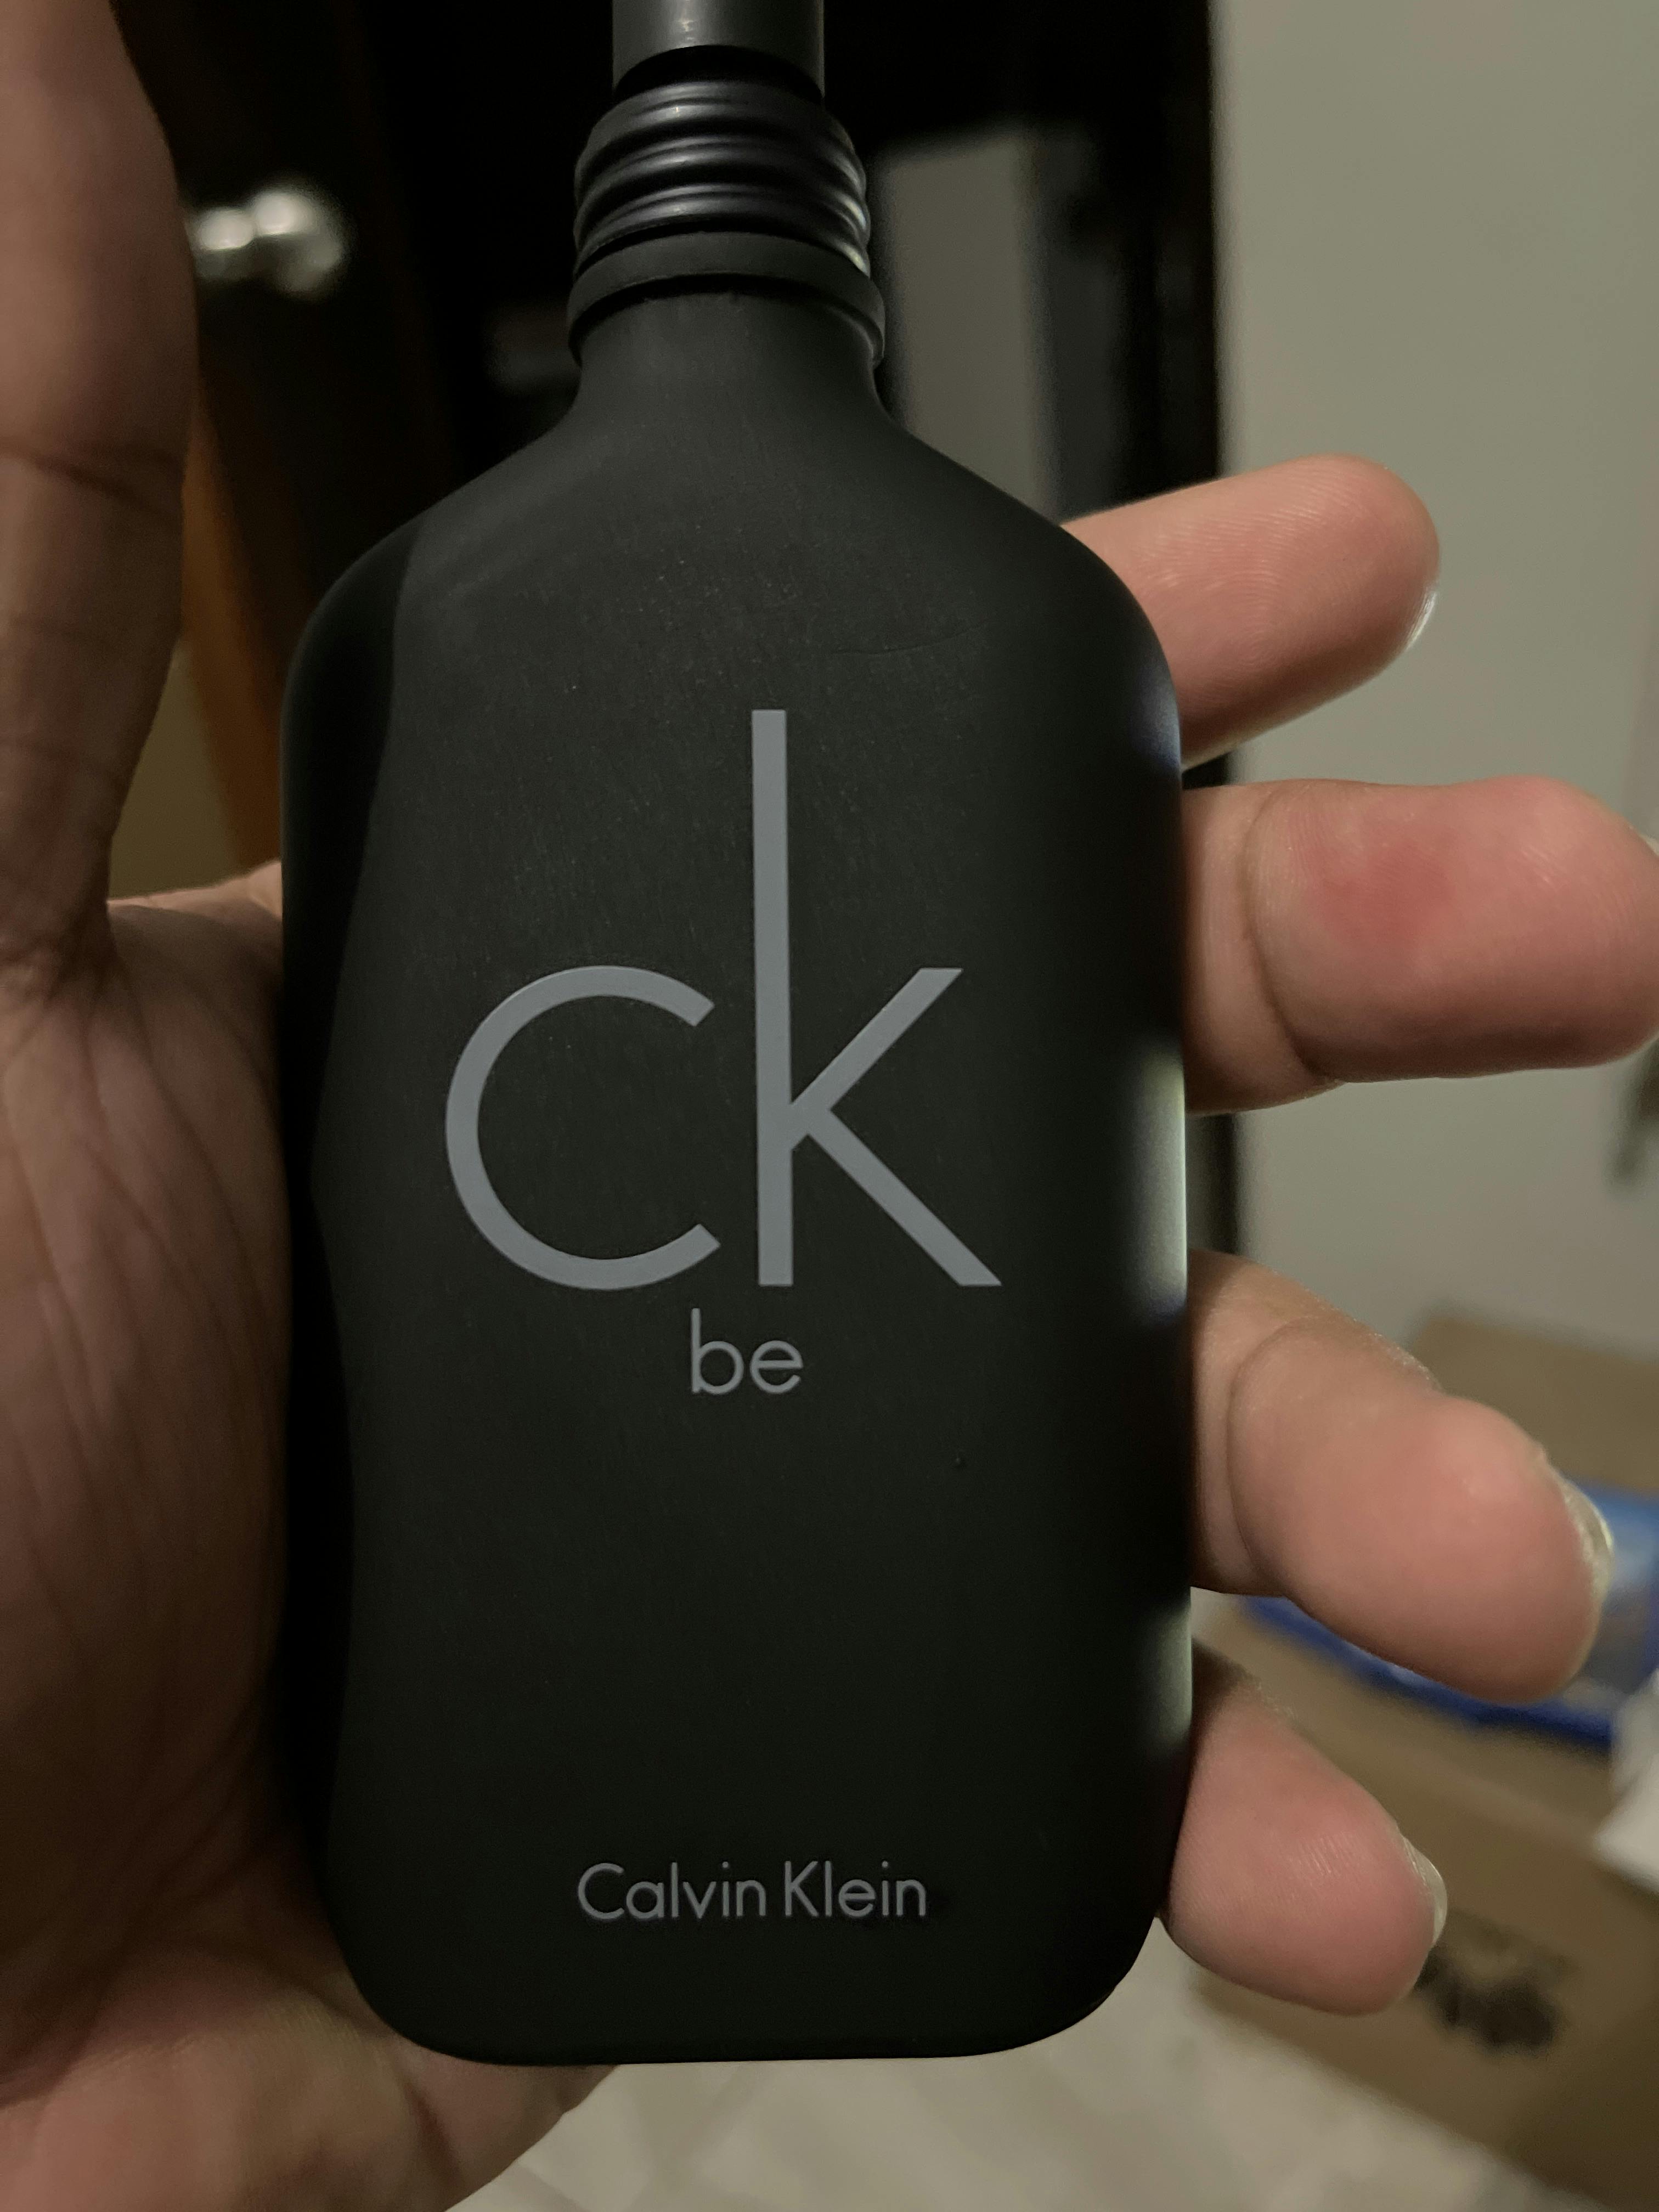 Calvin Klein CK BE 100ml | Branded and Authentic Perfumes for Men and Women